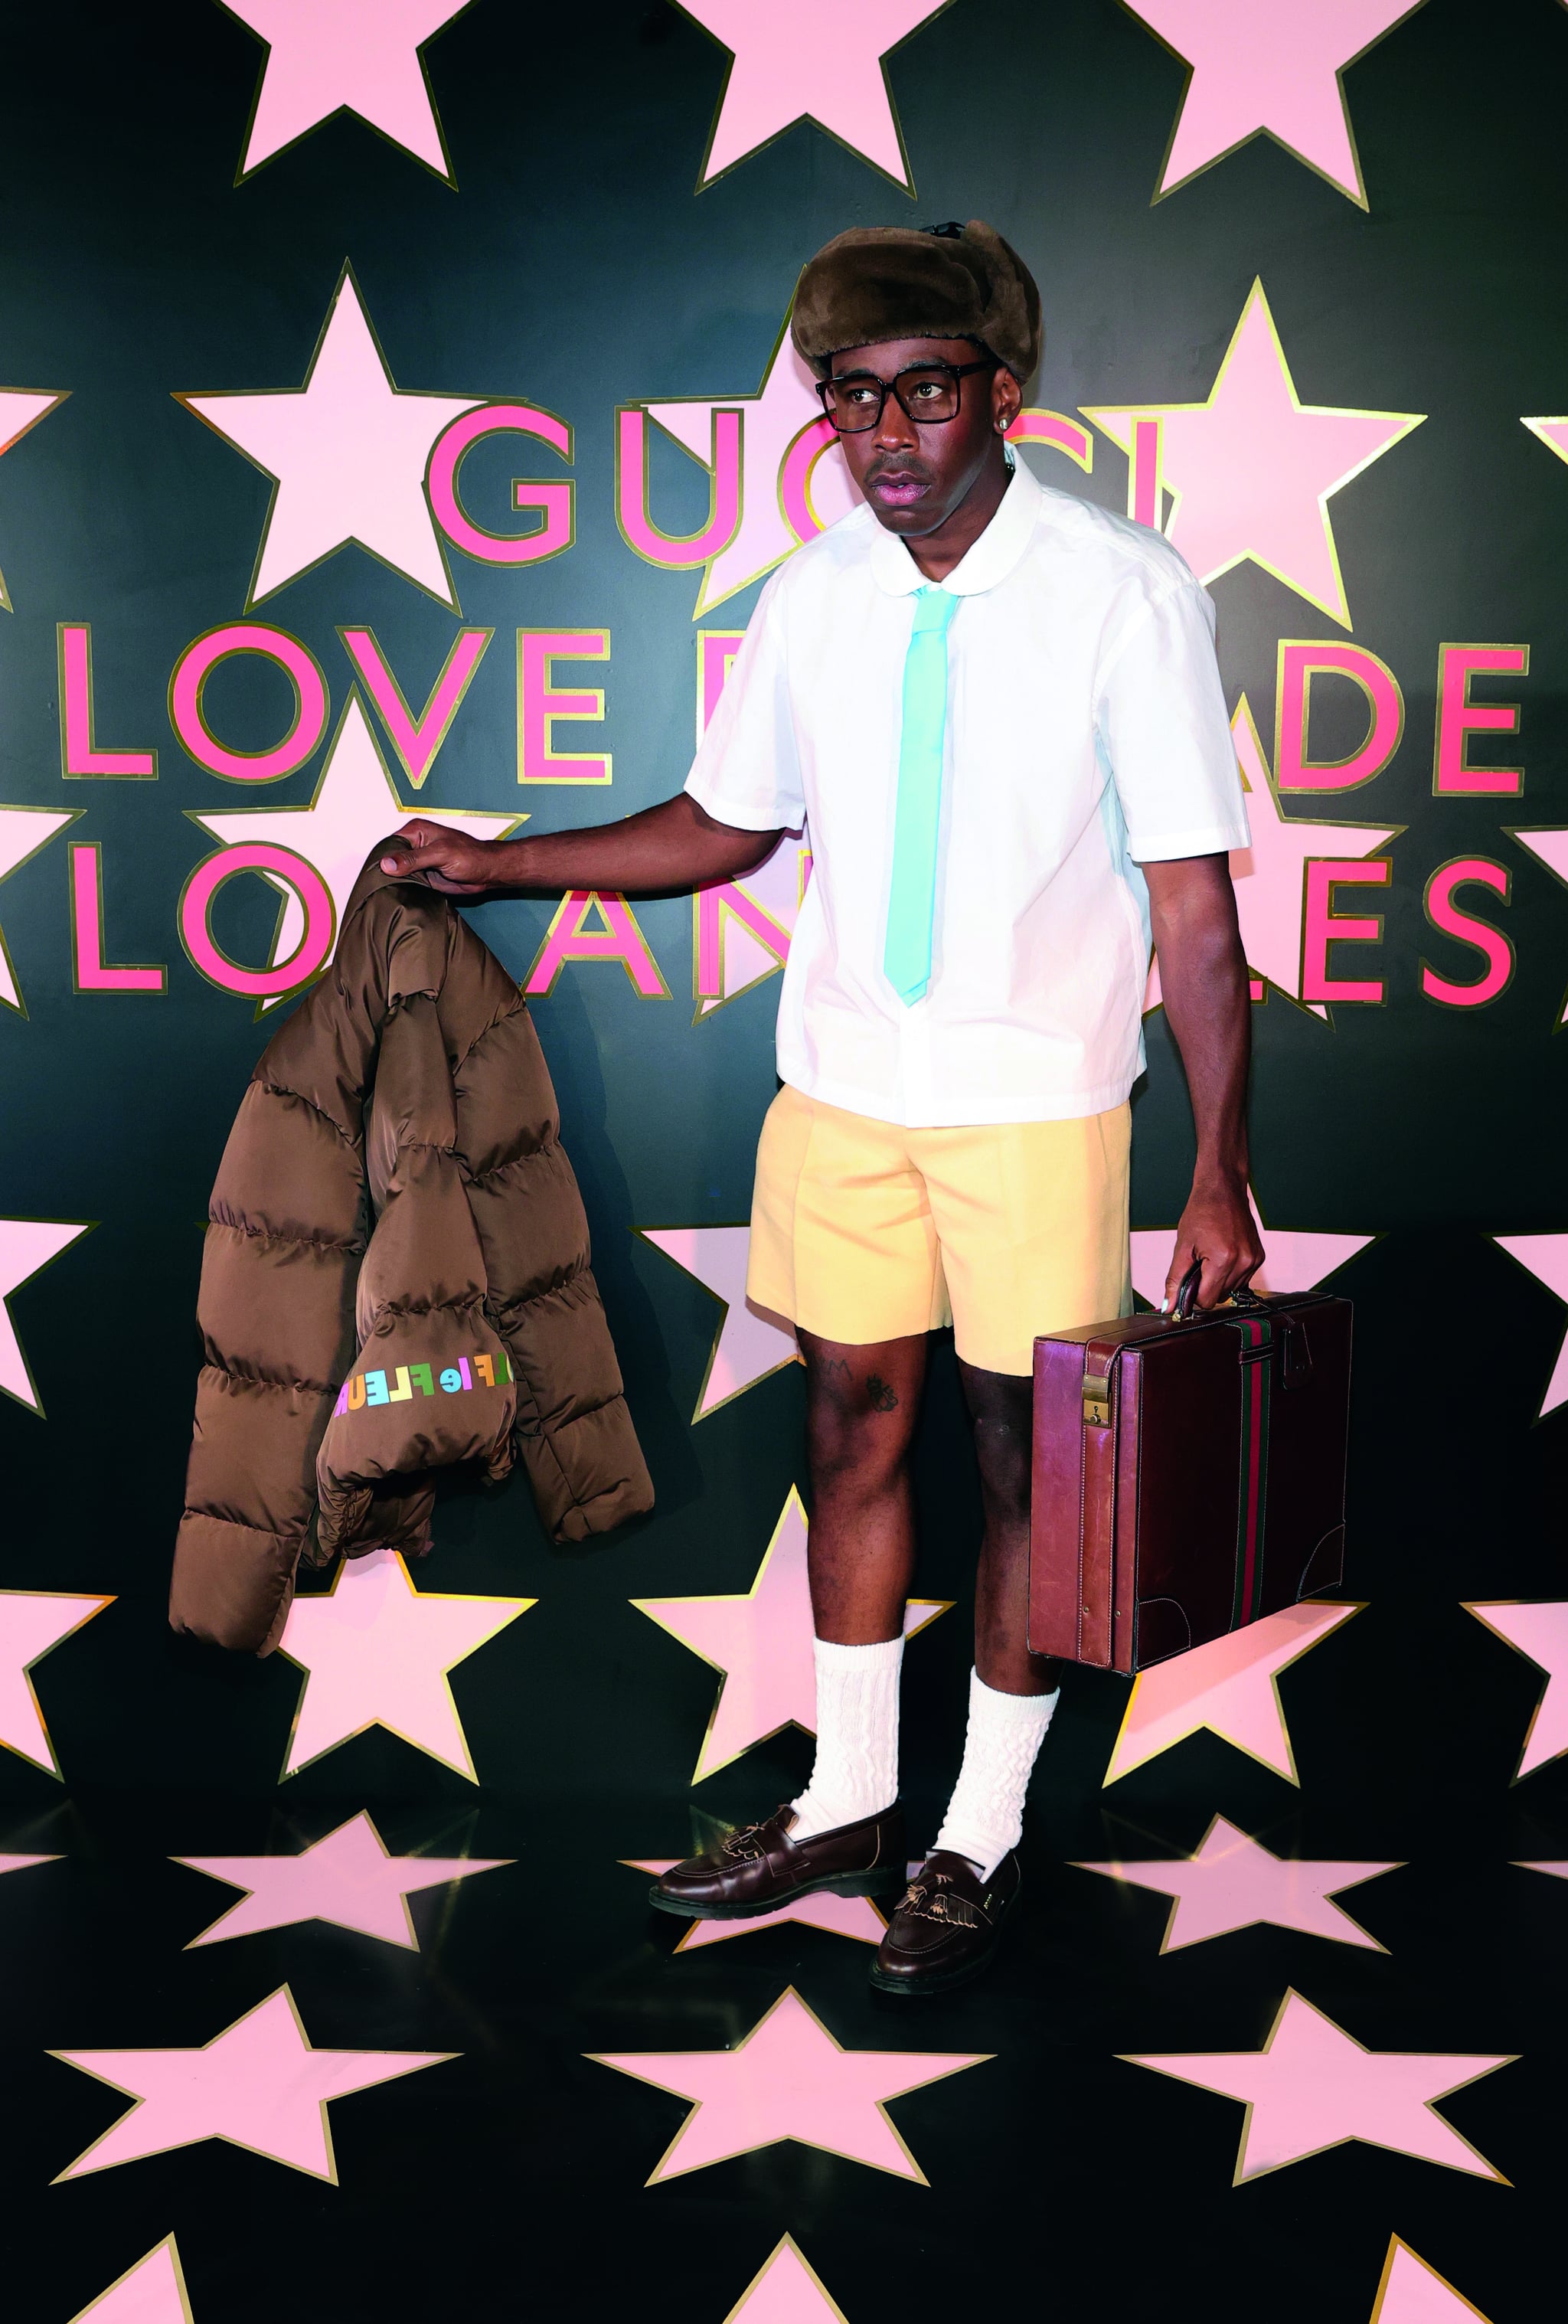 Tyler, the Creator at the Gucci Love Parade Runway Show, Gucci Shuts Down  Hollywood Blvd. With Macaulay Culkin on the Runway, Lizzo in the Front Row